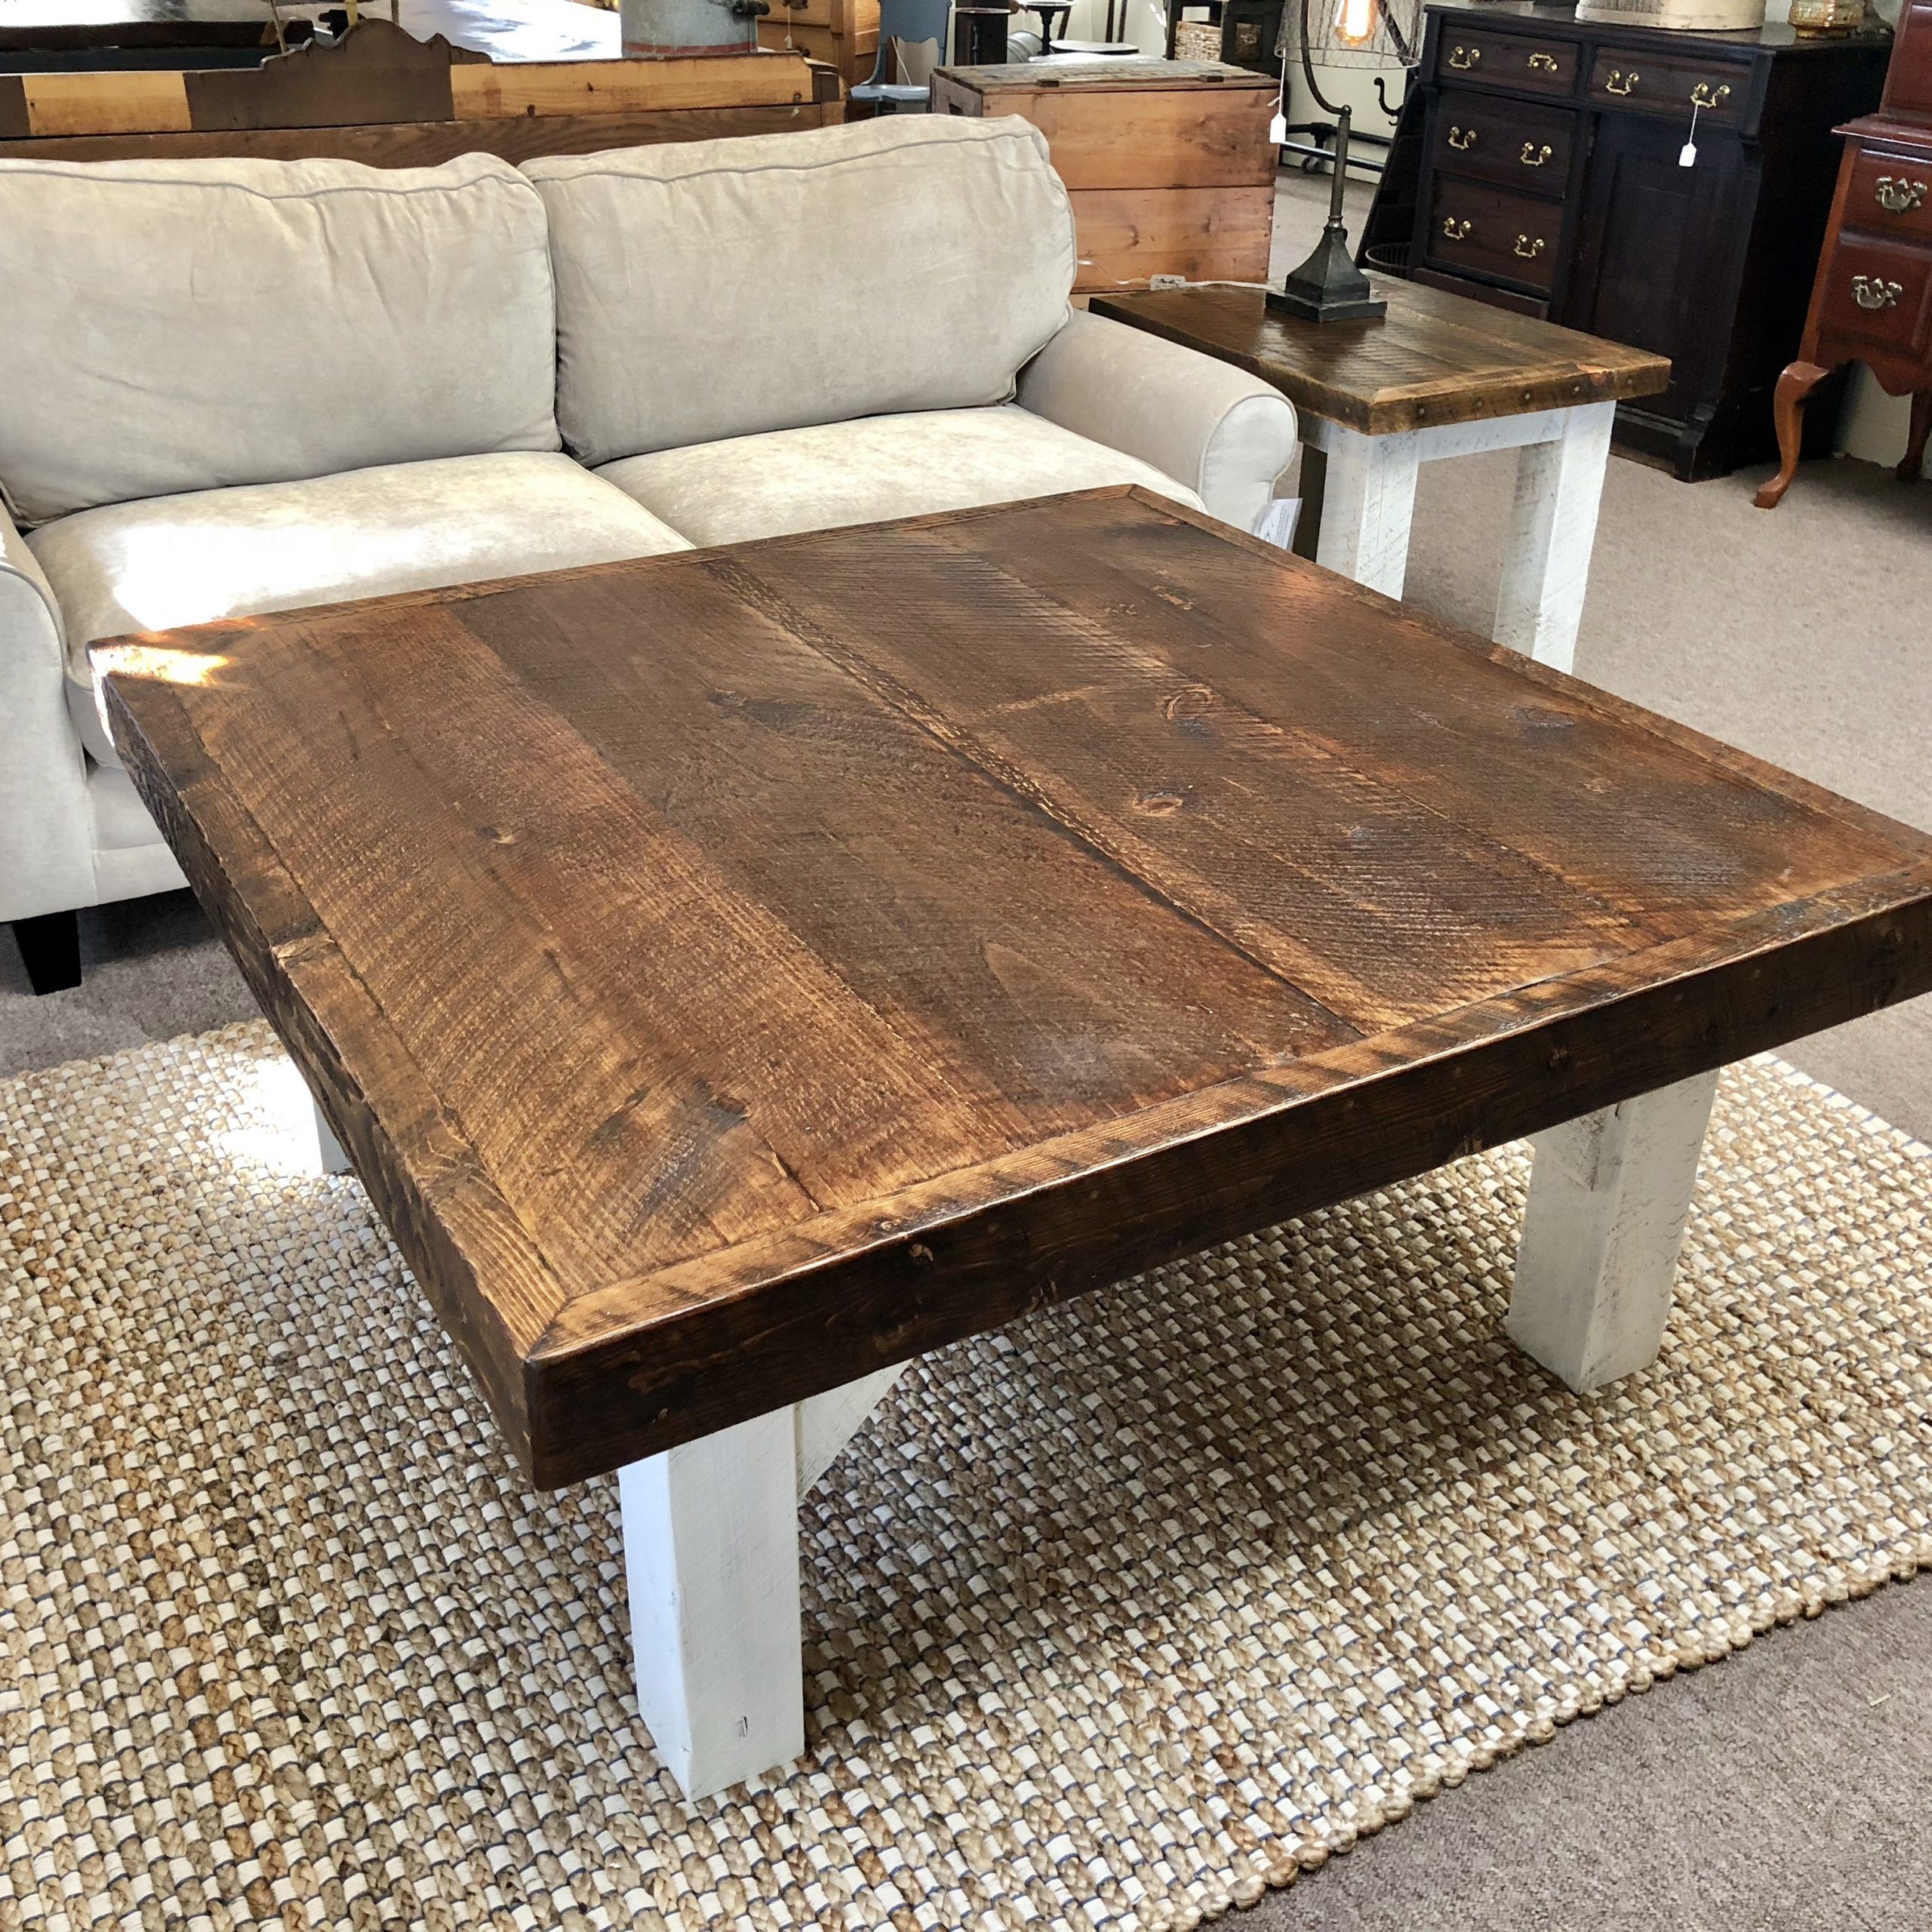 Rustic Square Coffee Table – Chic & Antique With Regard To 1 Shelf Square Coffee Tables (Photo 1 of 15)